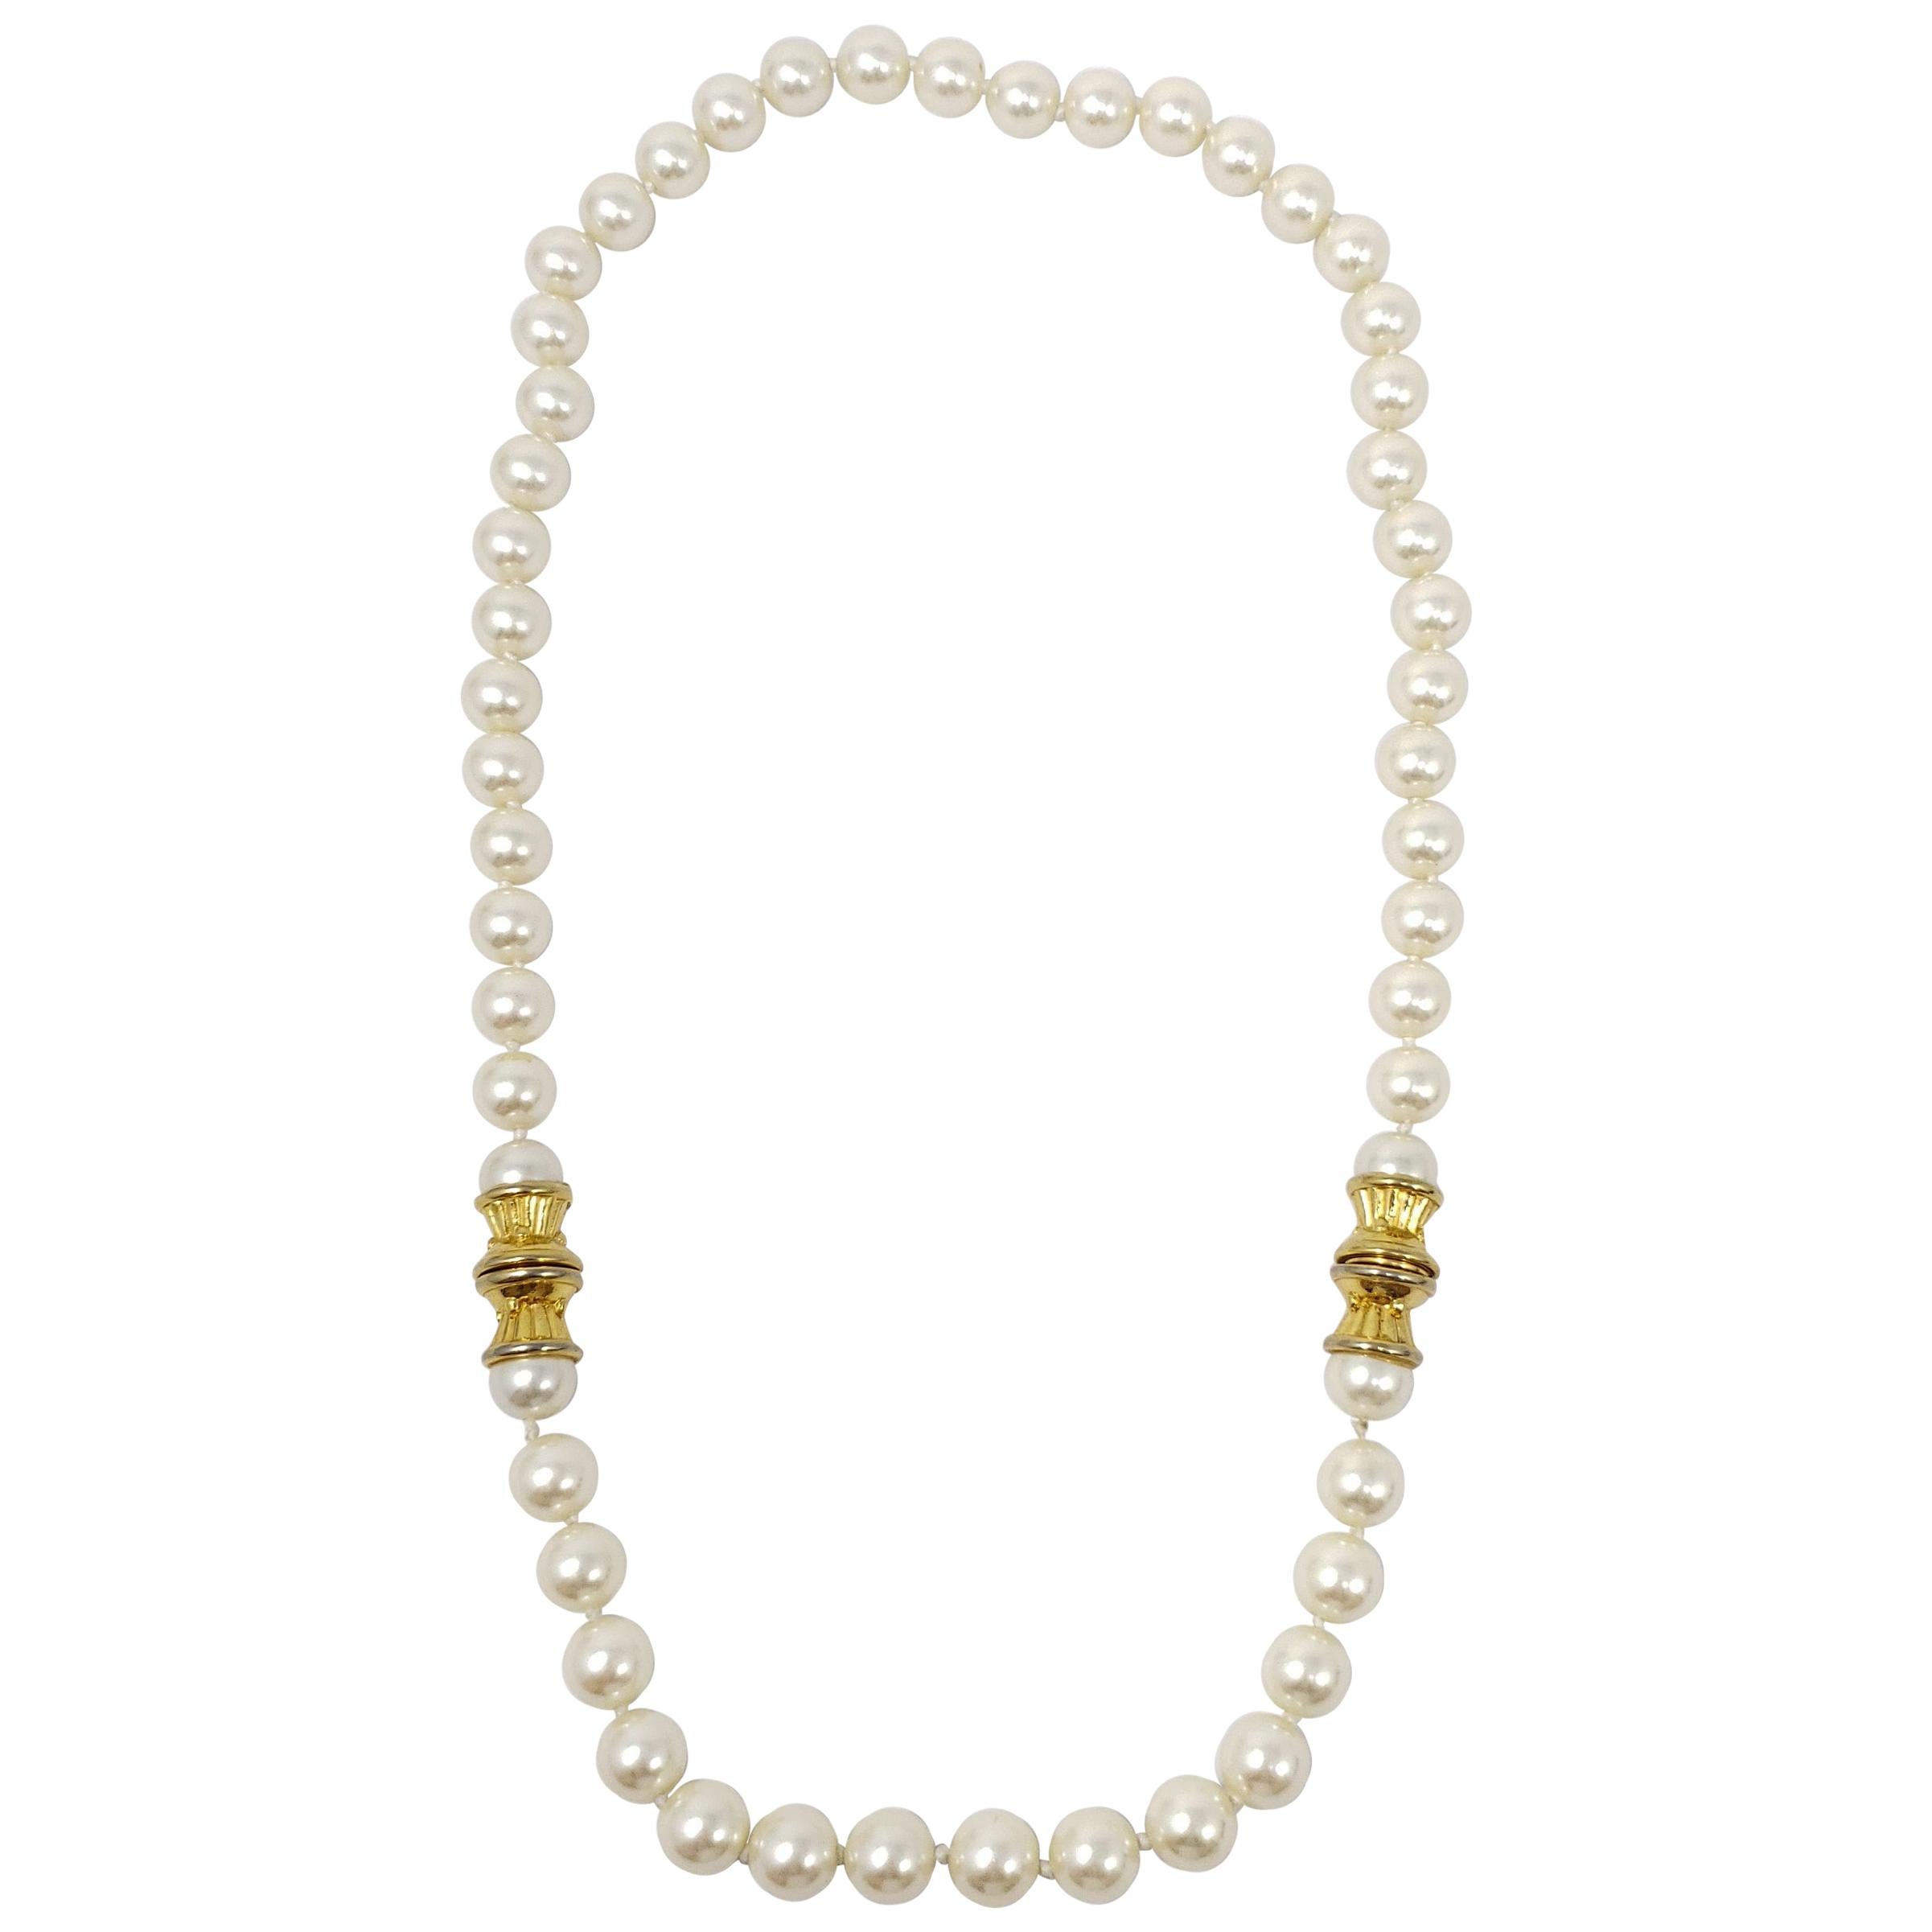 Vintage Faux Pearl Necklace, Gold Accents, Mid 1900s, 22 Inches For Sale